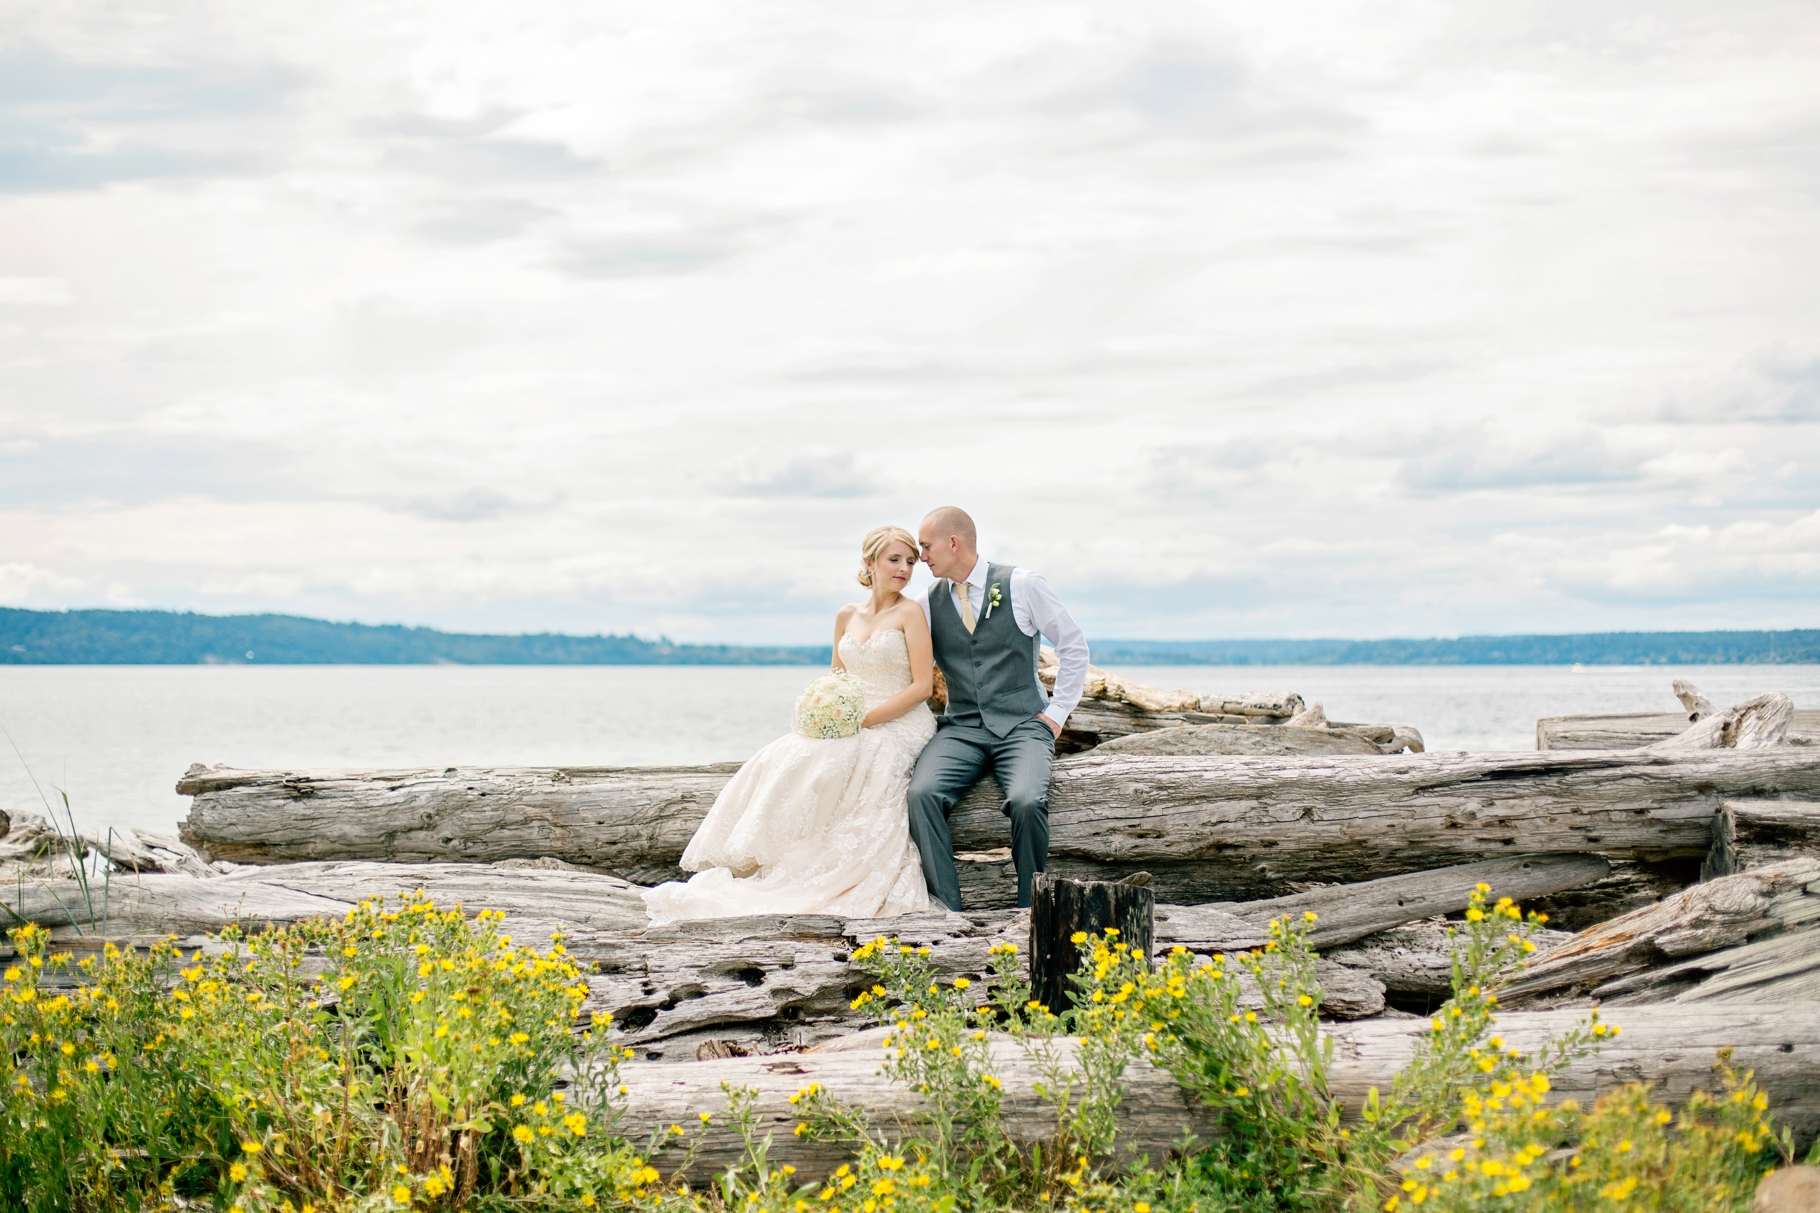 11-Bride-Groom-Portraits-Waterfront-Pudget-Sound-Driftwood-Normandy-Cove-Beach-Wedding-Photographer-Bride-Groom-Seattle-Wedding-Photography-Northwest